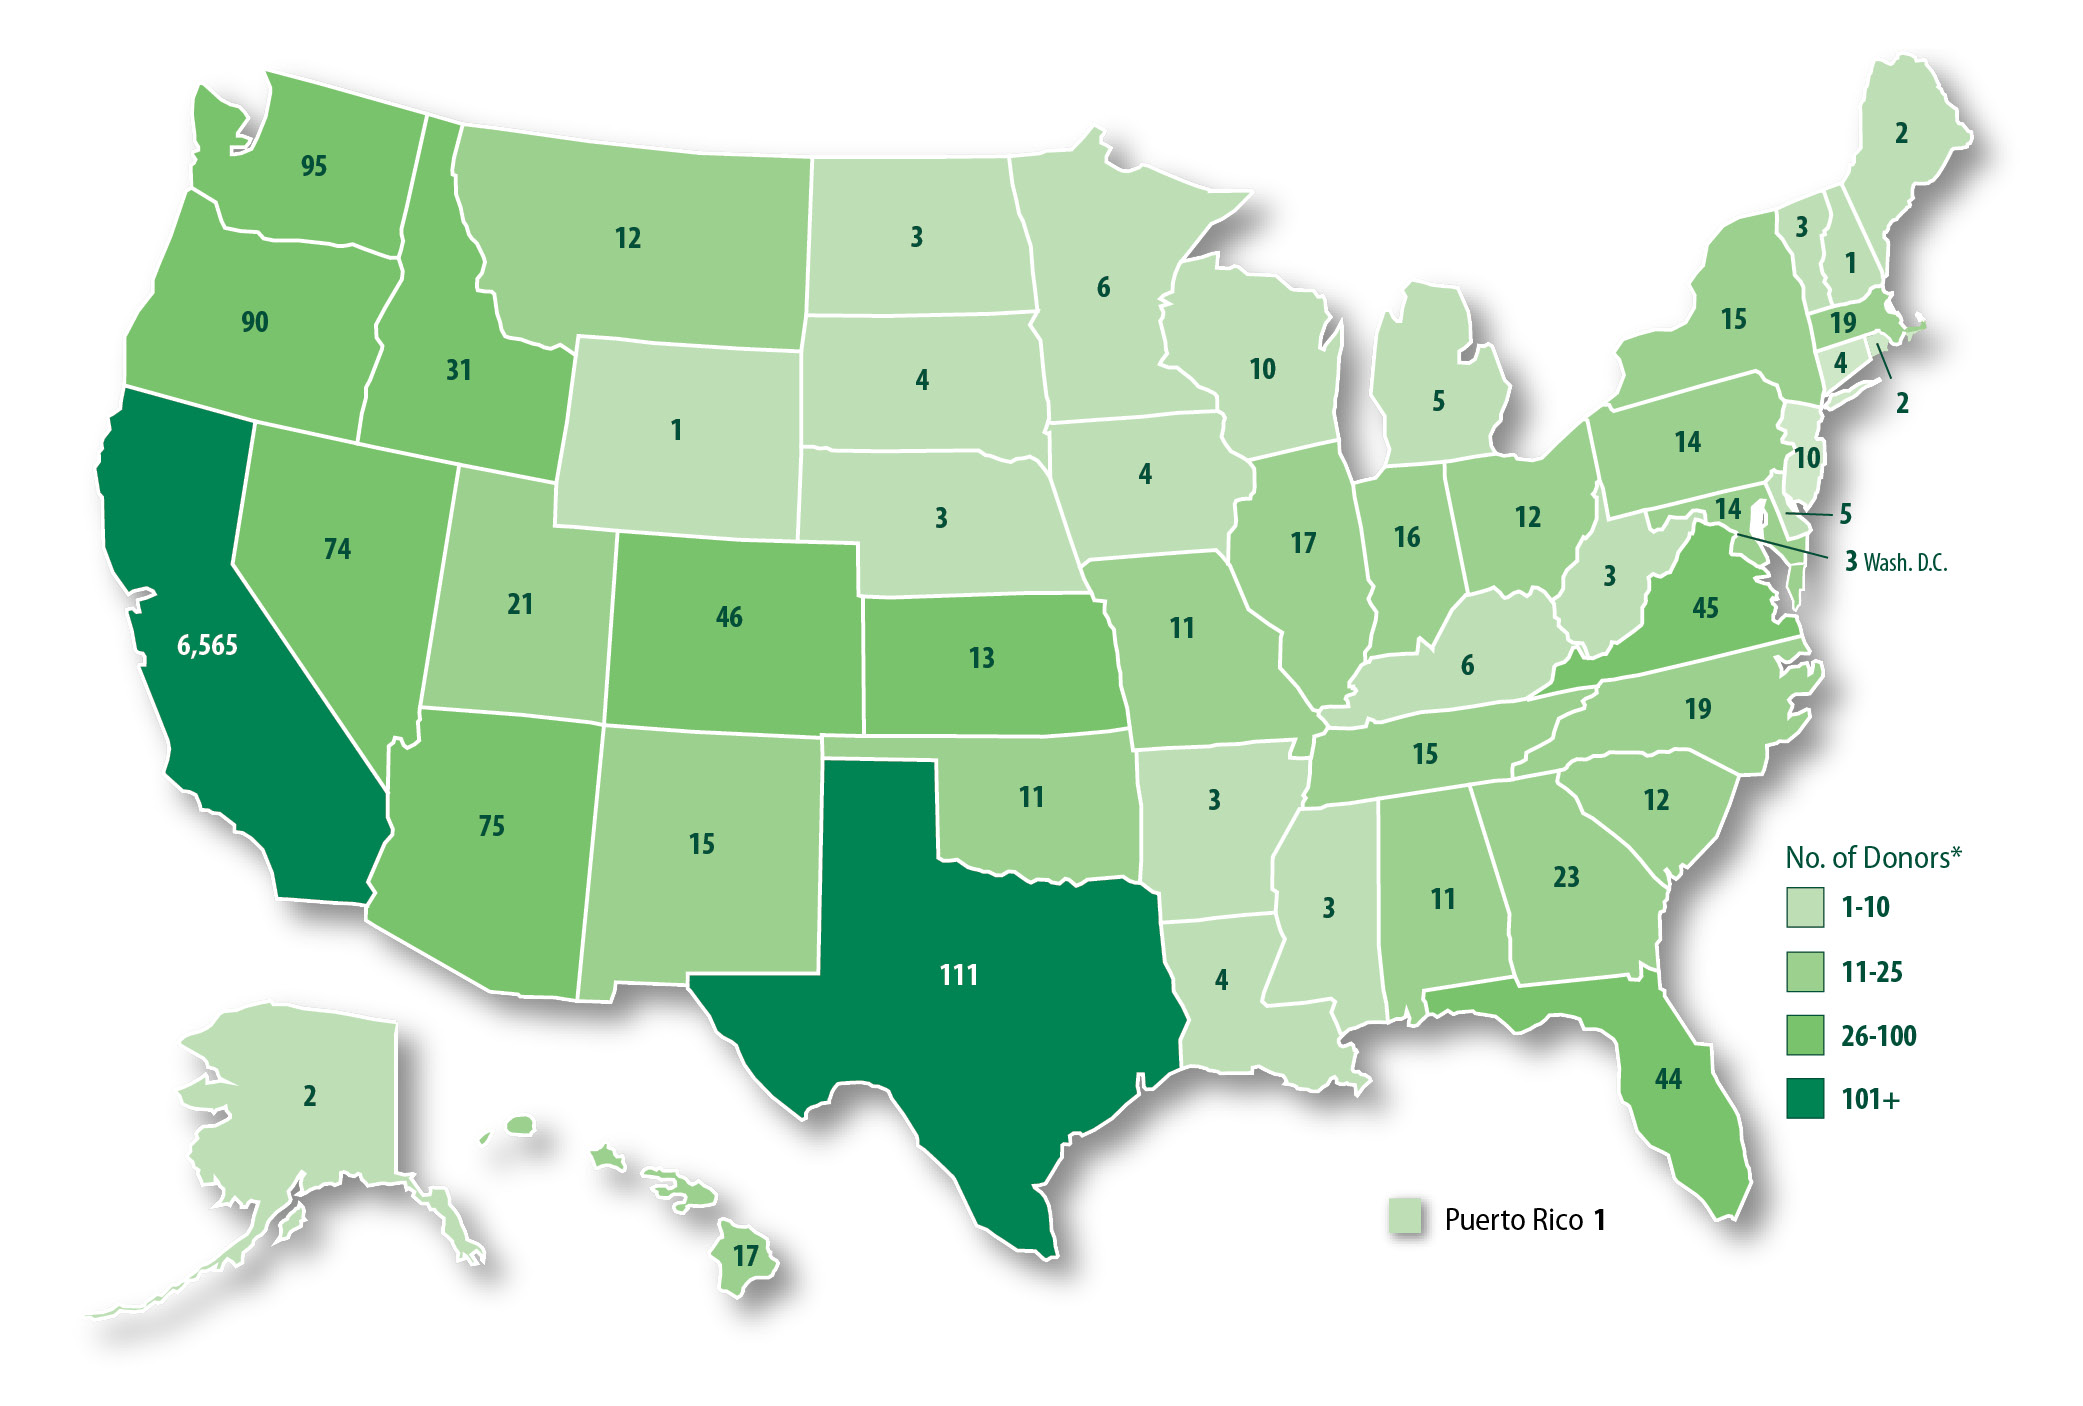 U.S. map showing alumni donations from every state